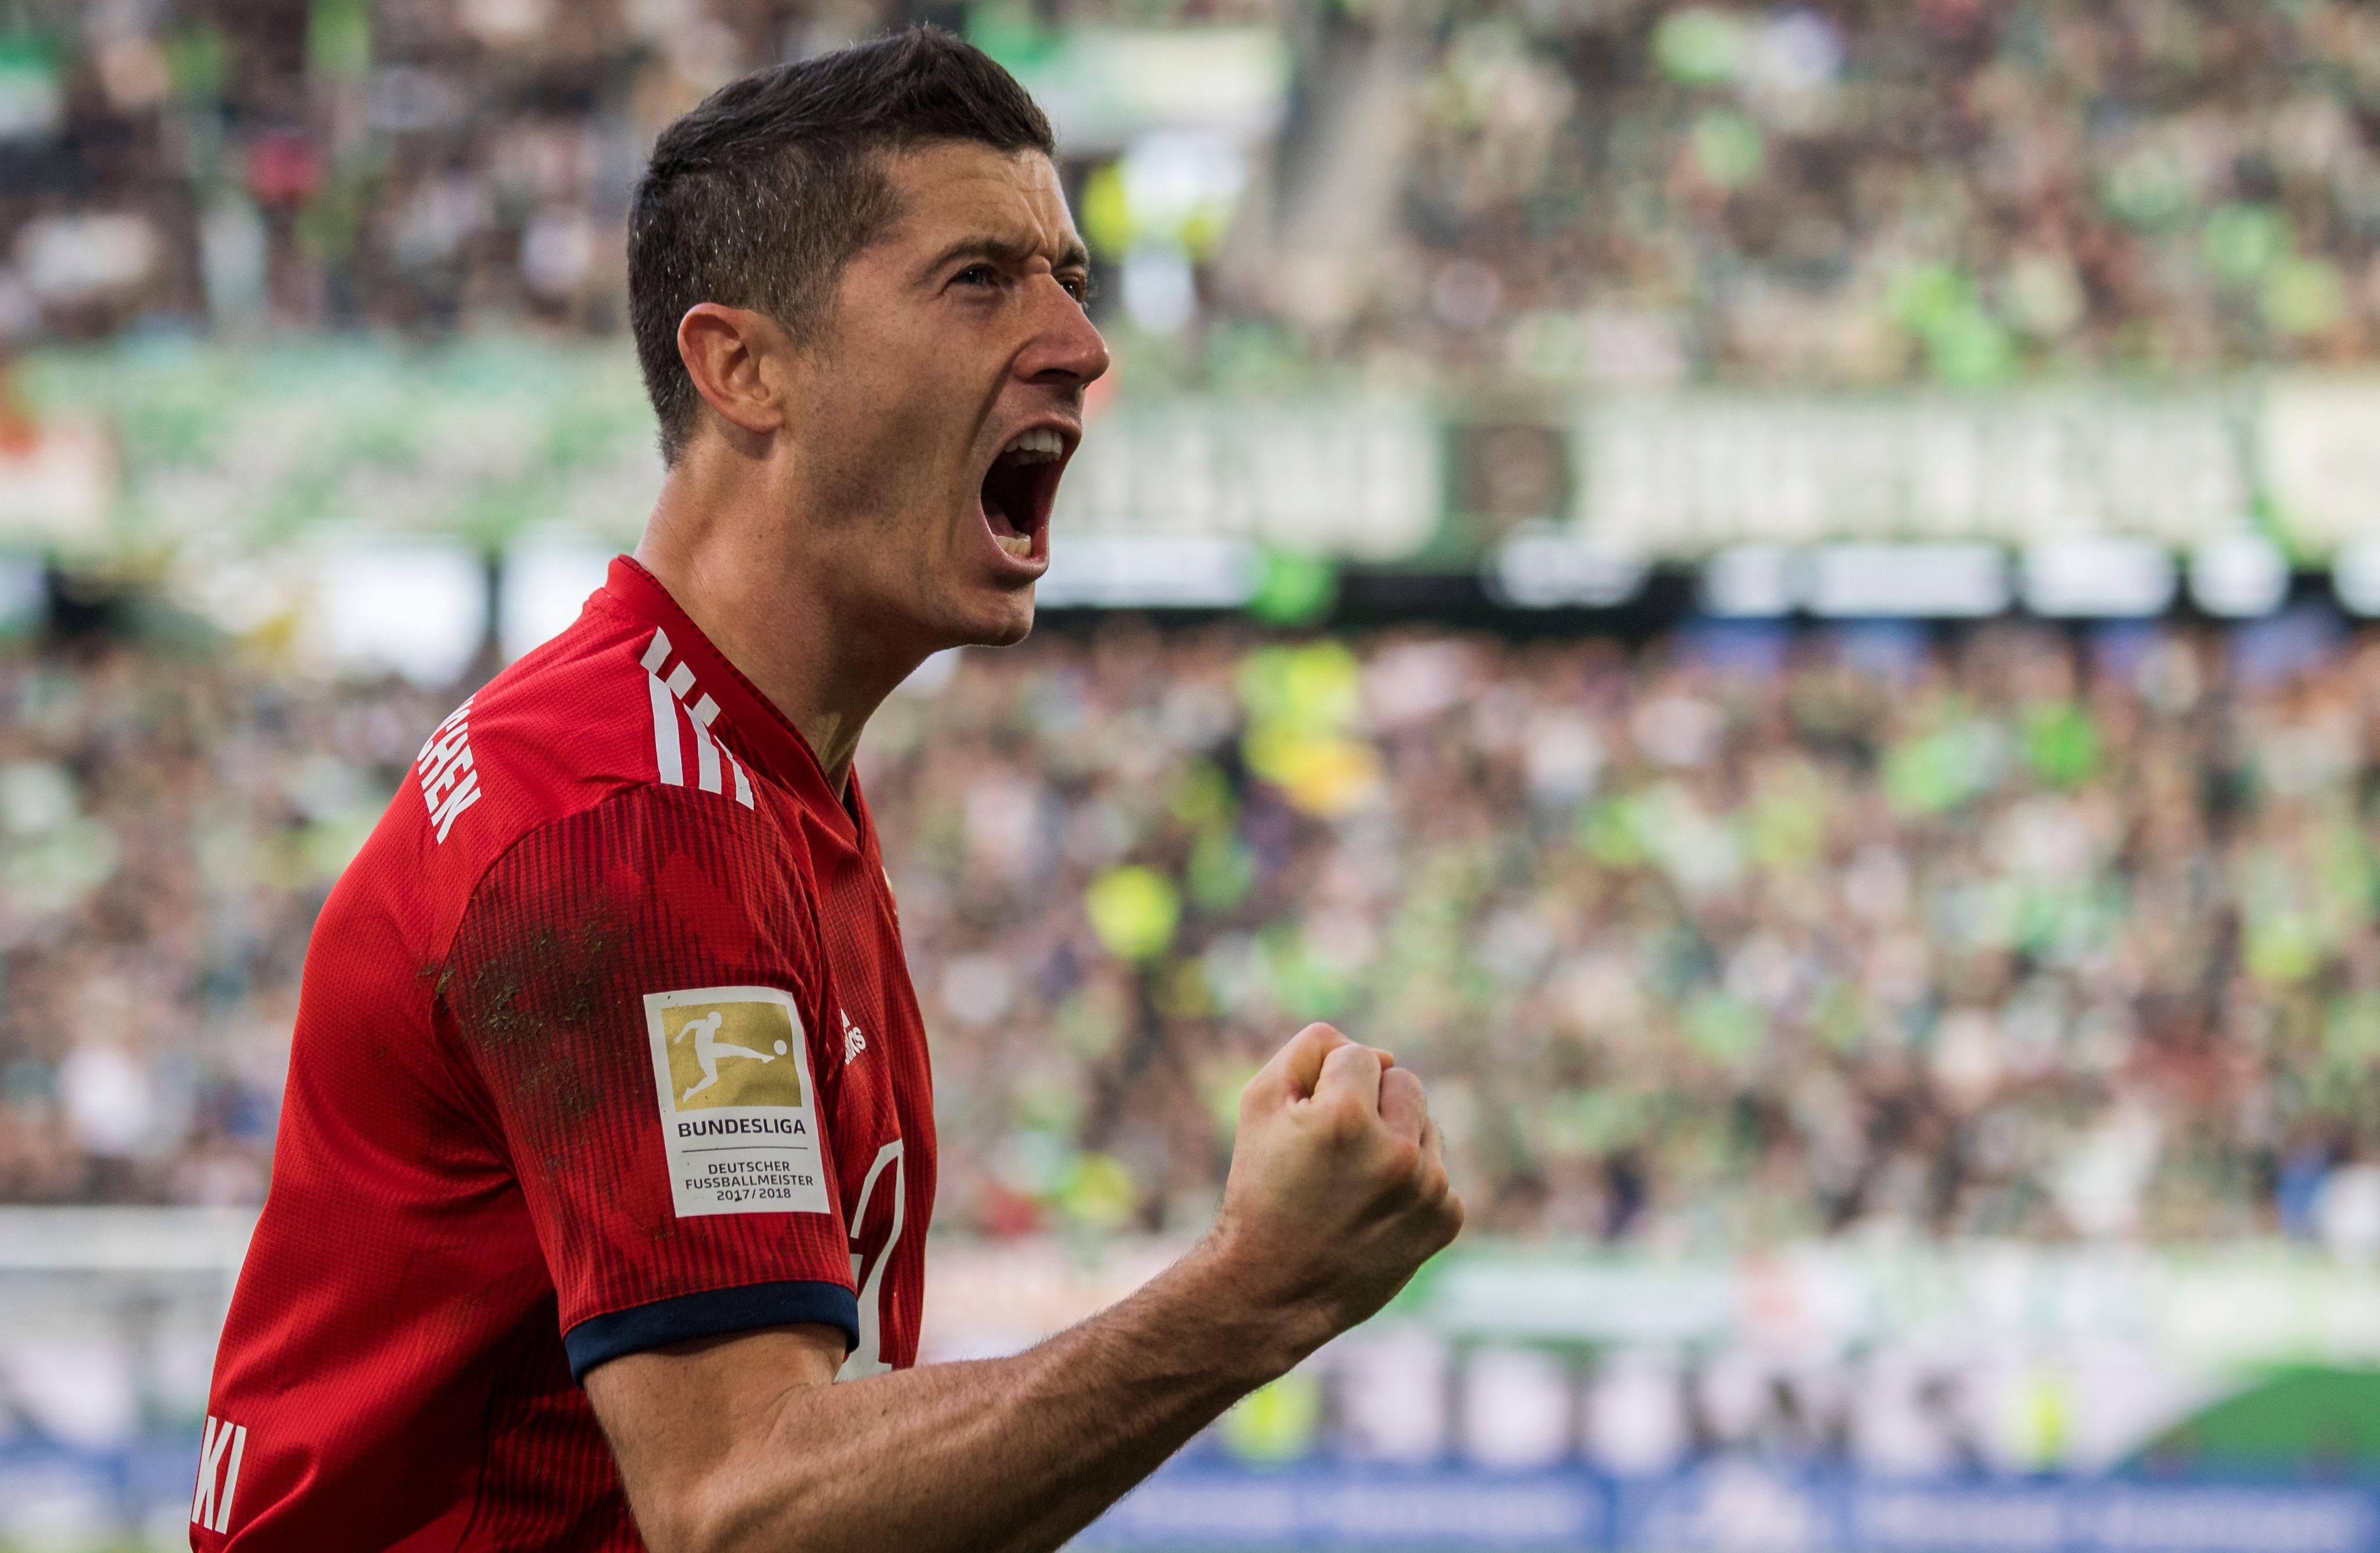 Lewandowski extended his excellent record against Wolves. (Photo by John MacDougall/AFP/Getty Images)